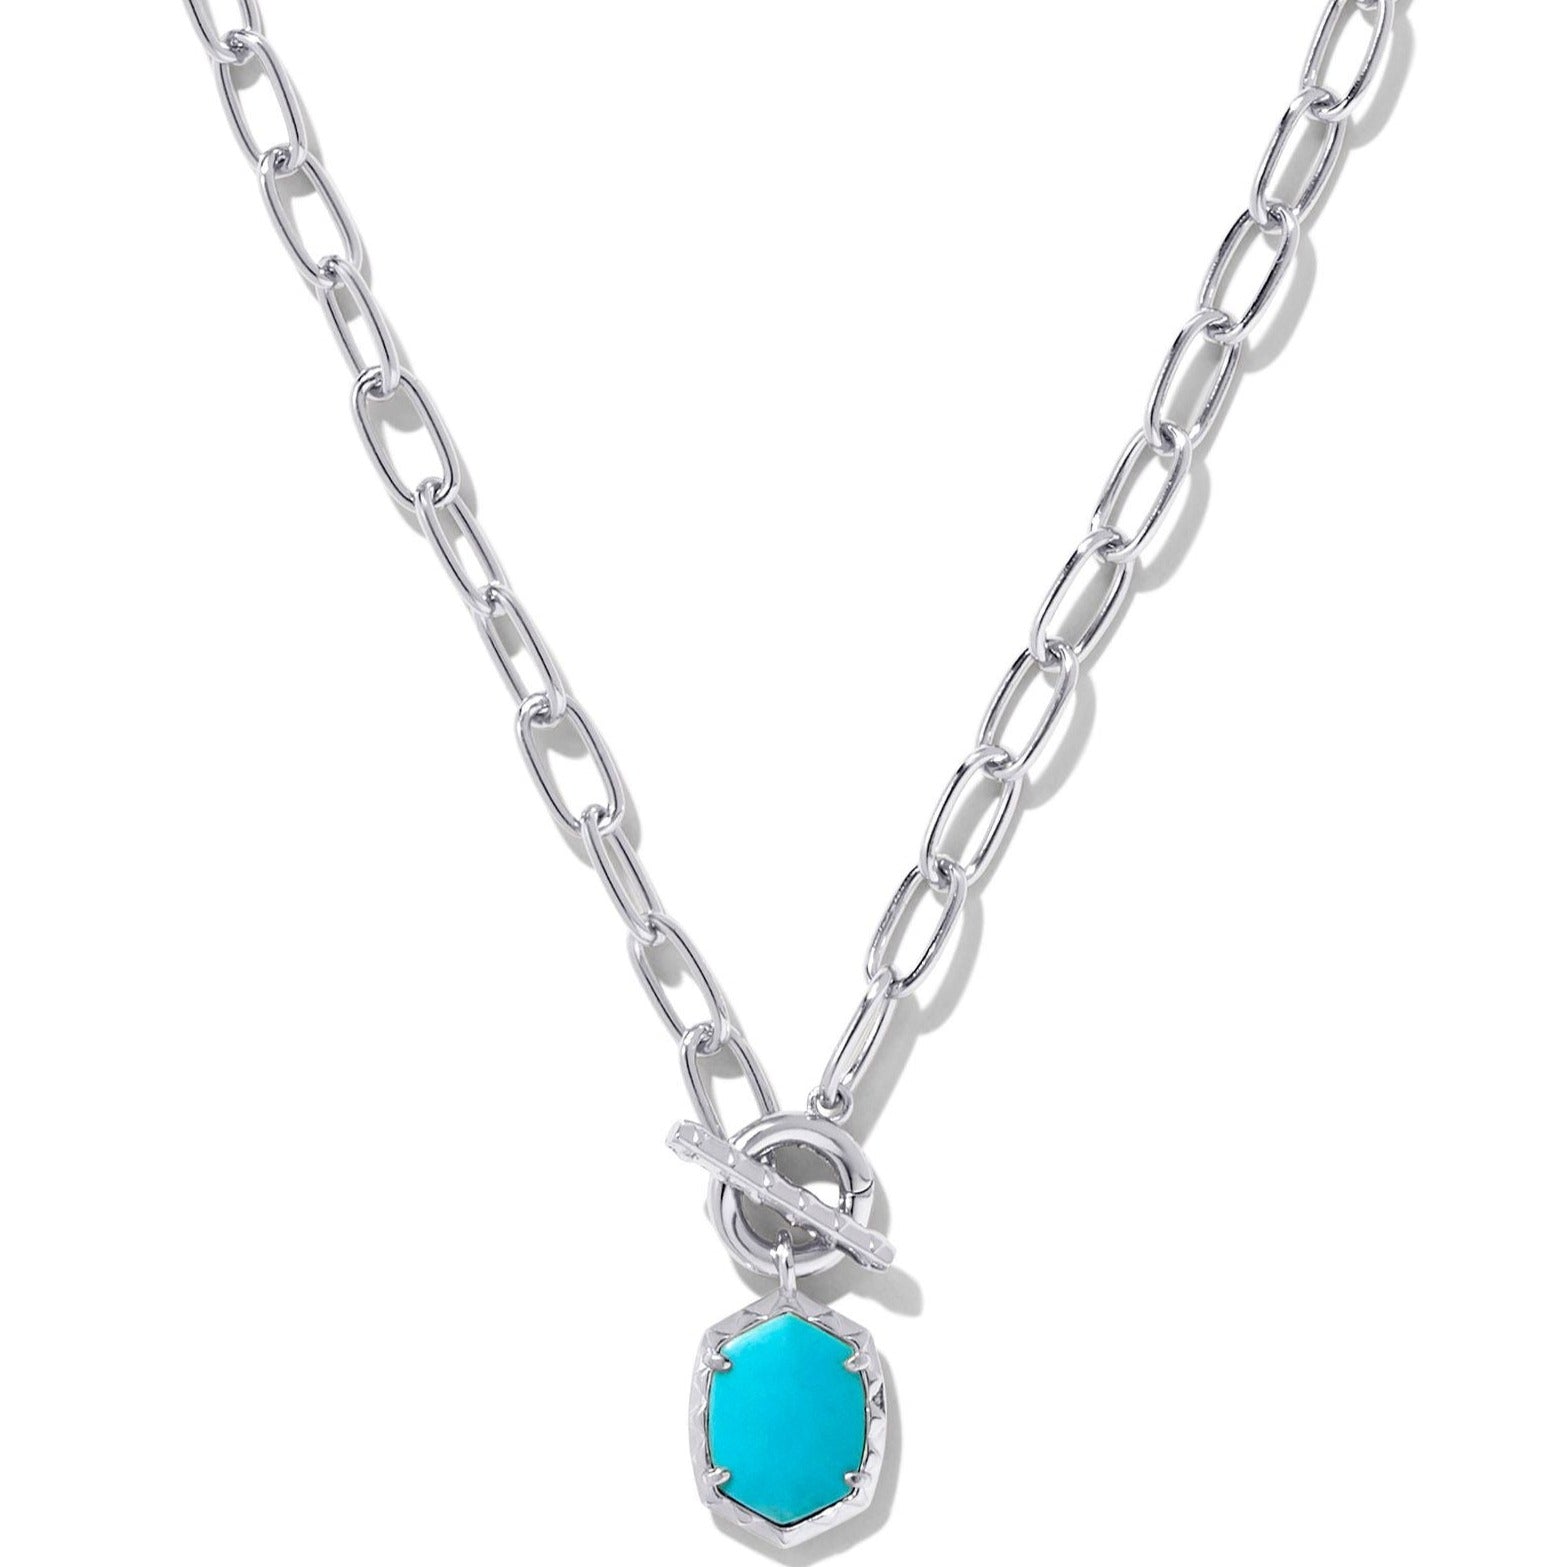 Kendra Scott | Daphne Silver Link and Chain Necklace in Variegated Turquoise Magnesite - Giddy Up Glamour Boutique